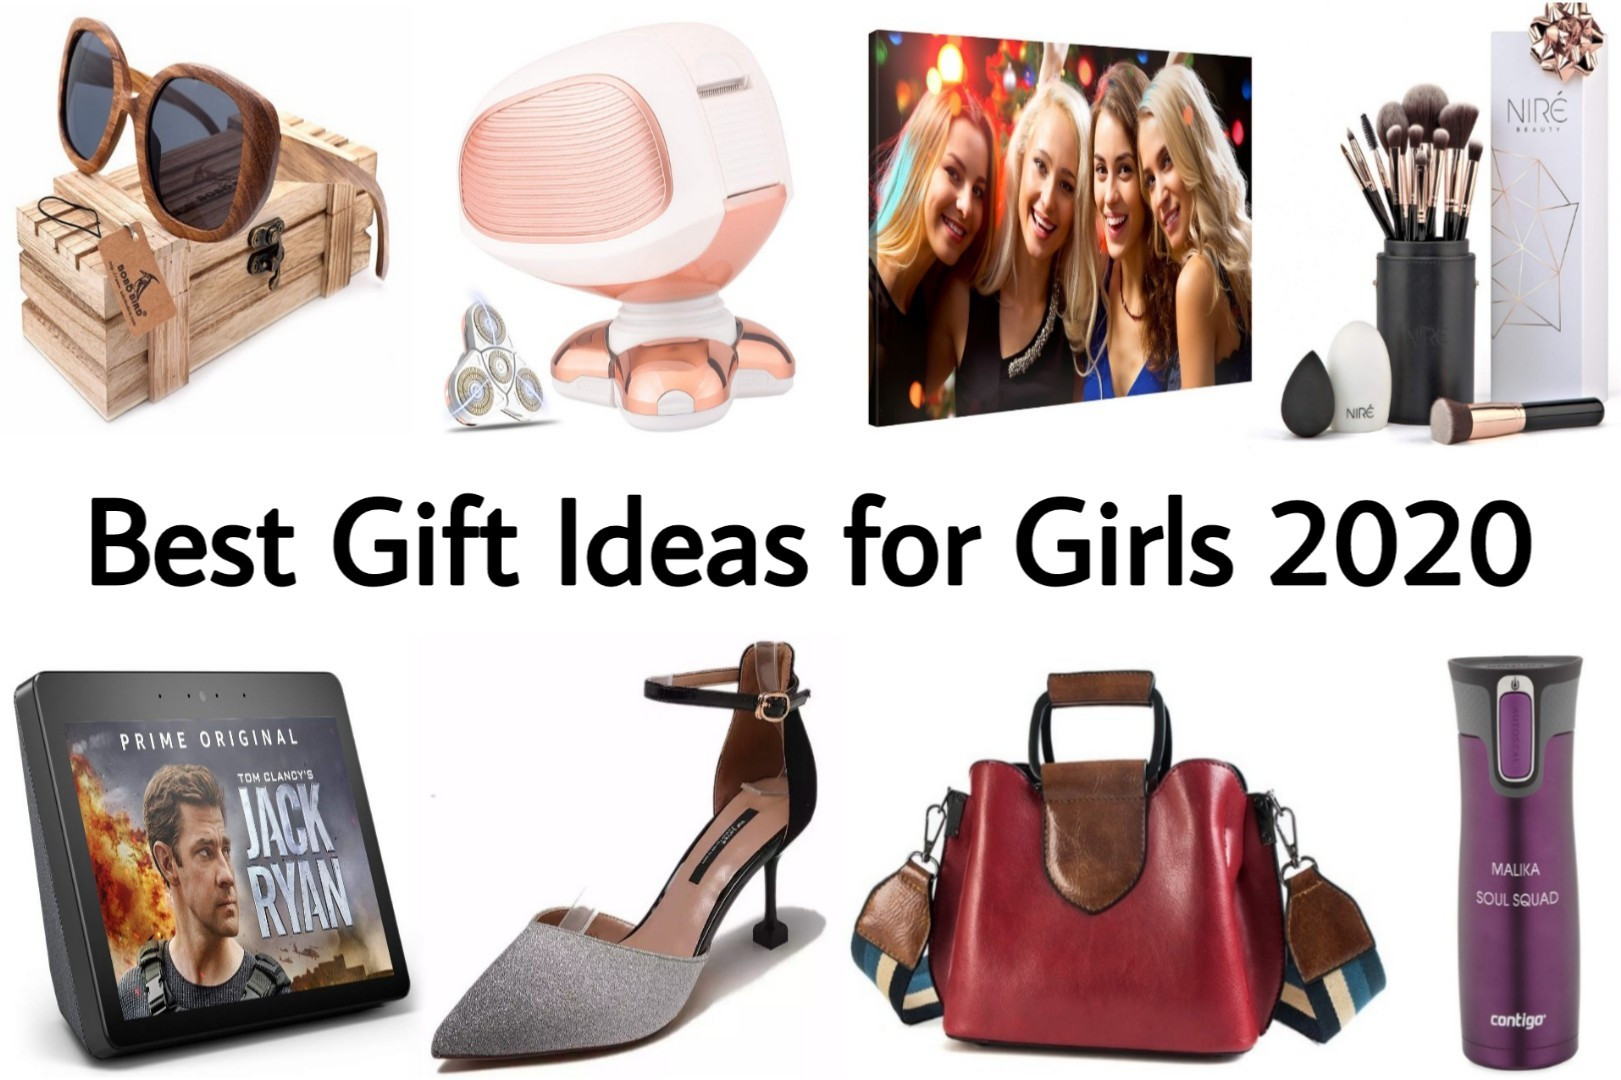 Amazing Gift Ideas For Girlfriend
 Best Christmas Gifts For Girlfriend 2020